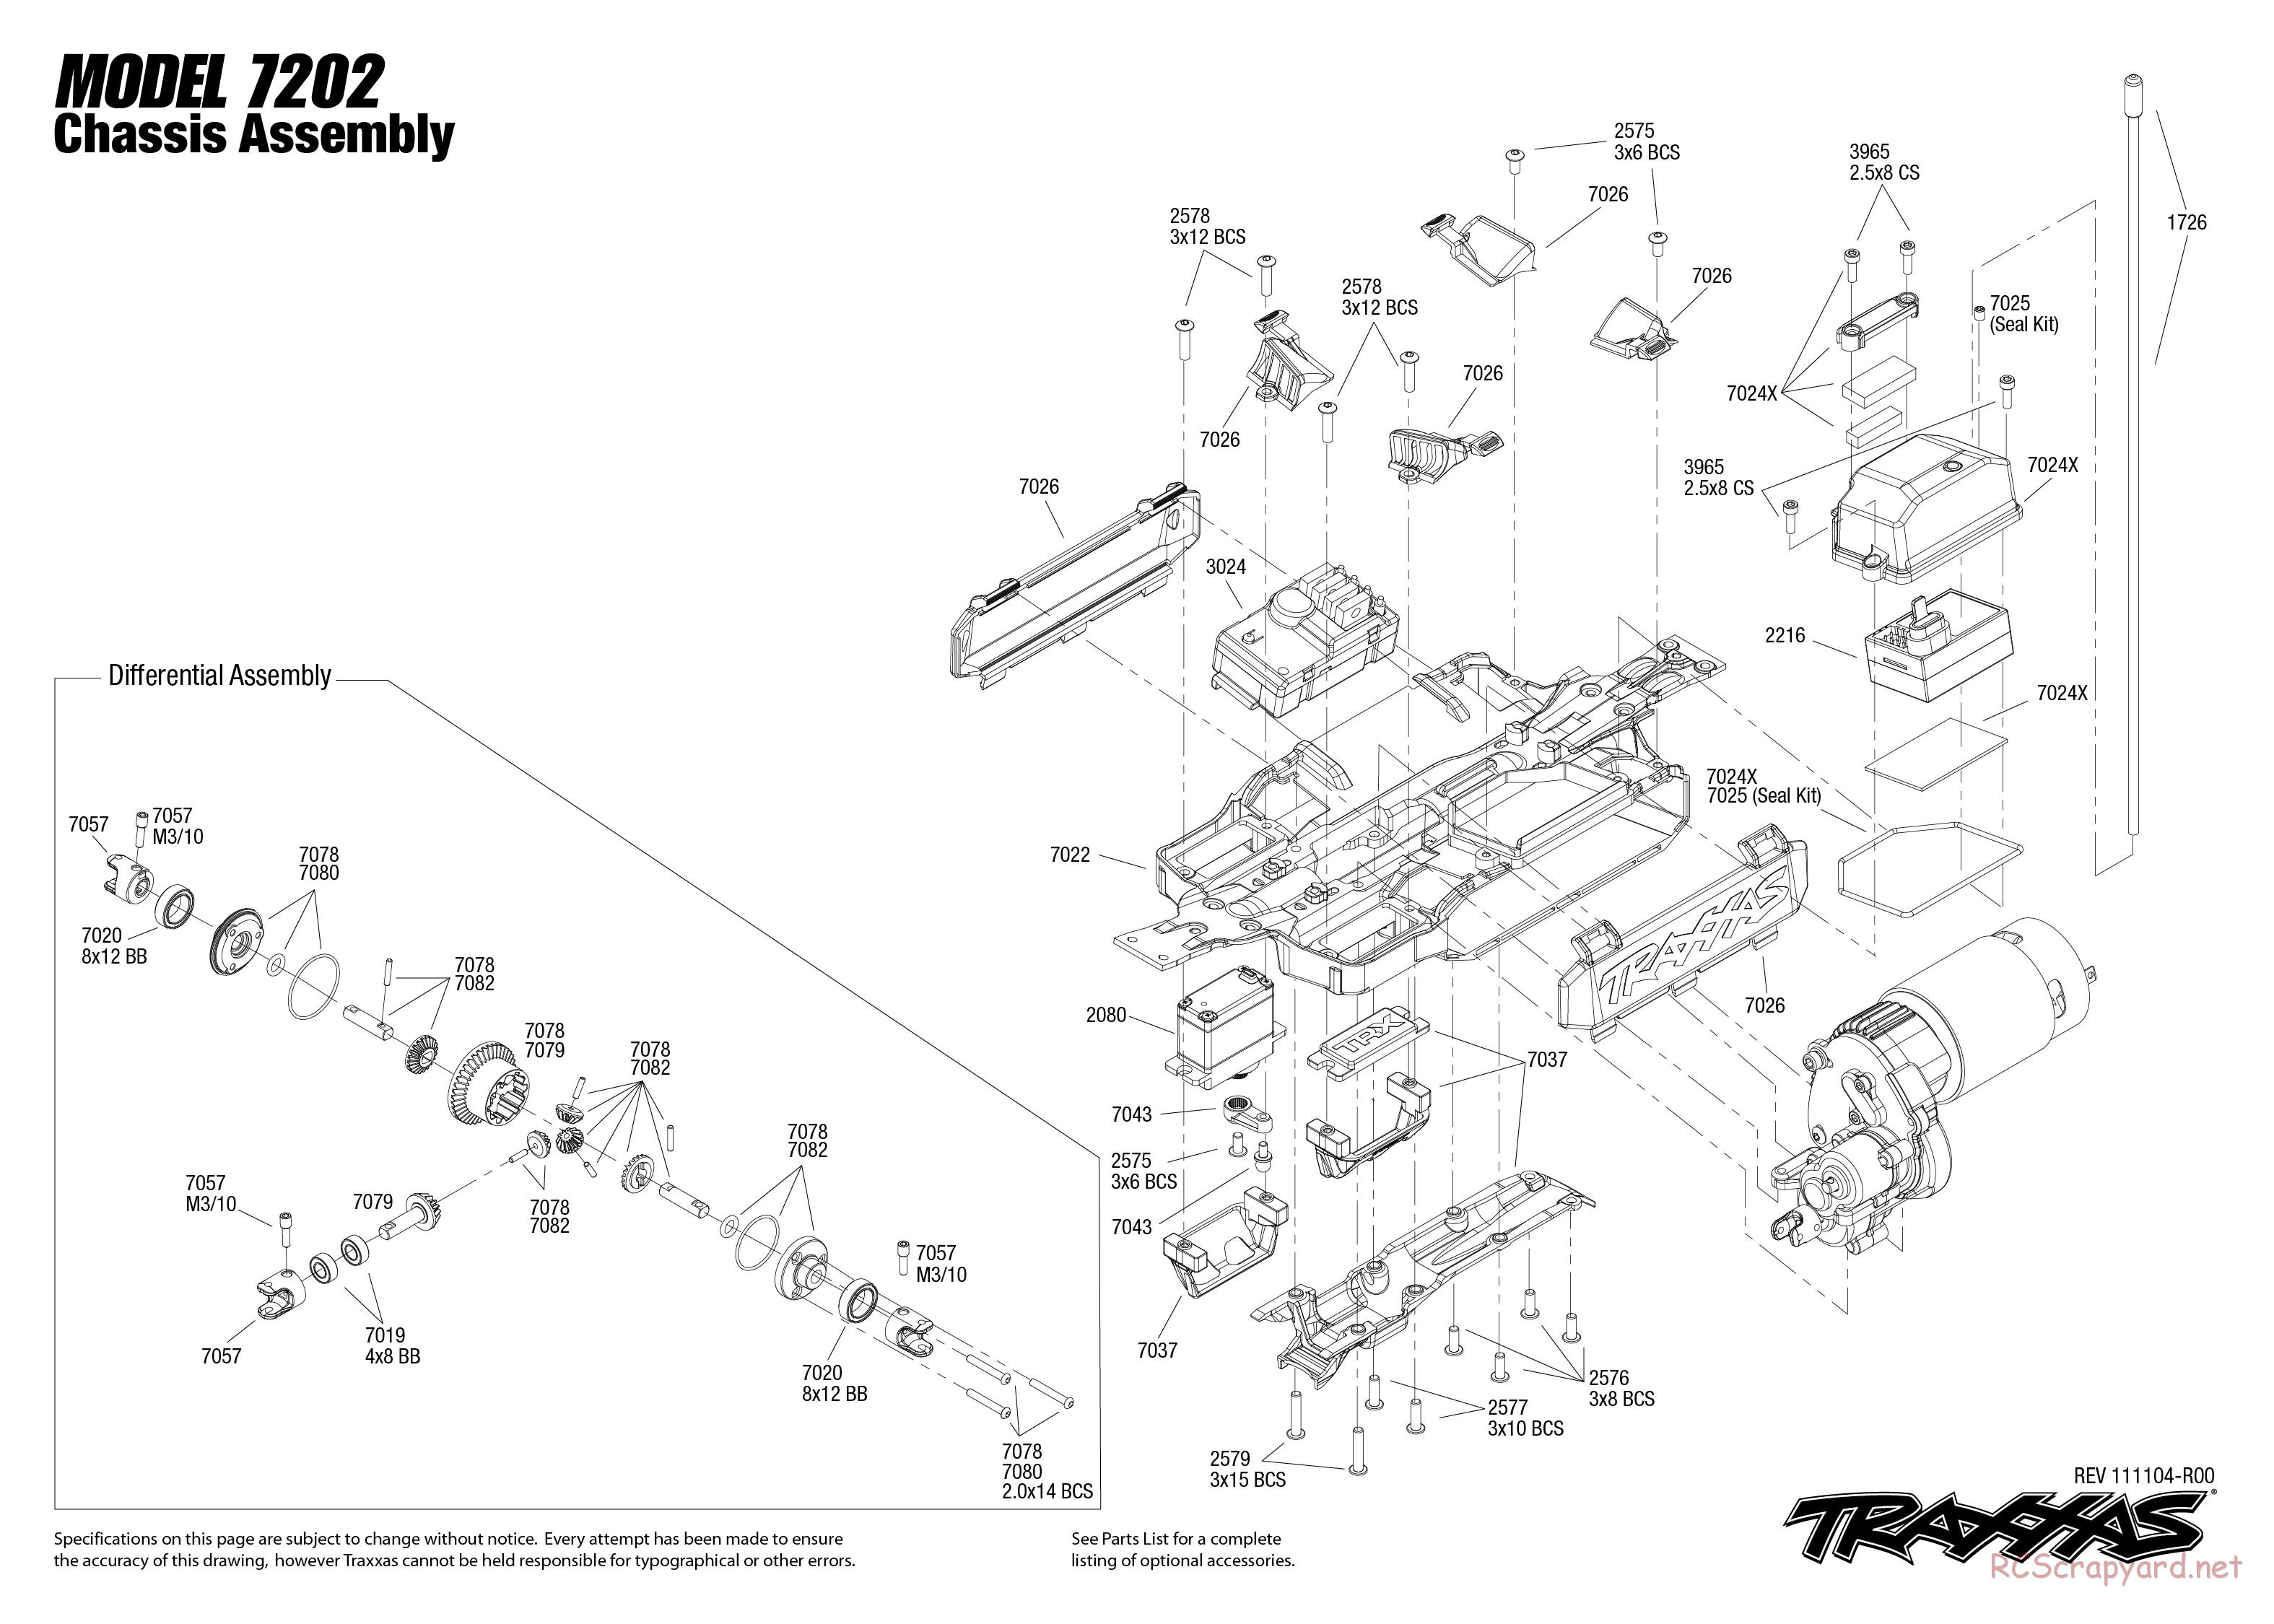 Traxxas - 1/16 Grave Digger (2012) - Exploded Views - Page 1